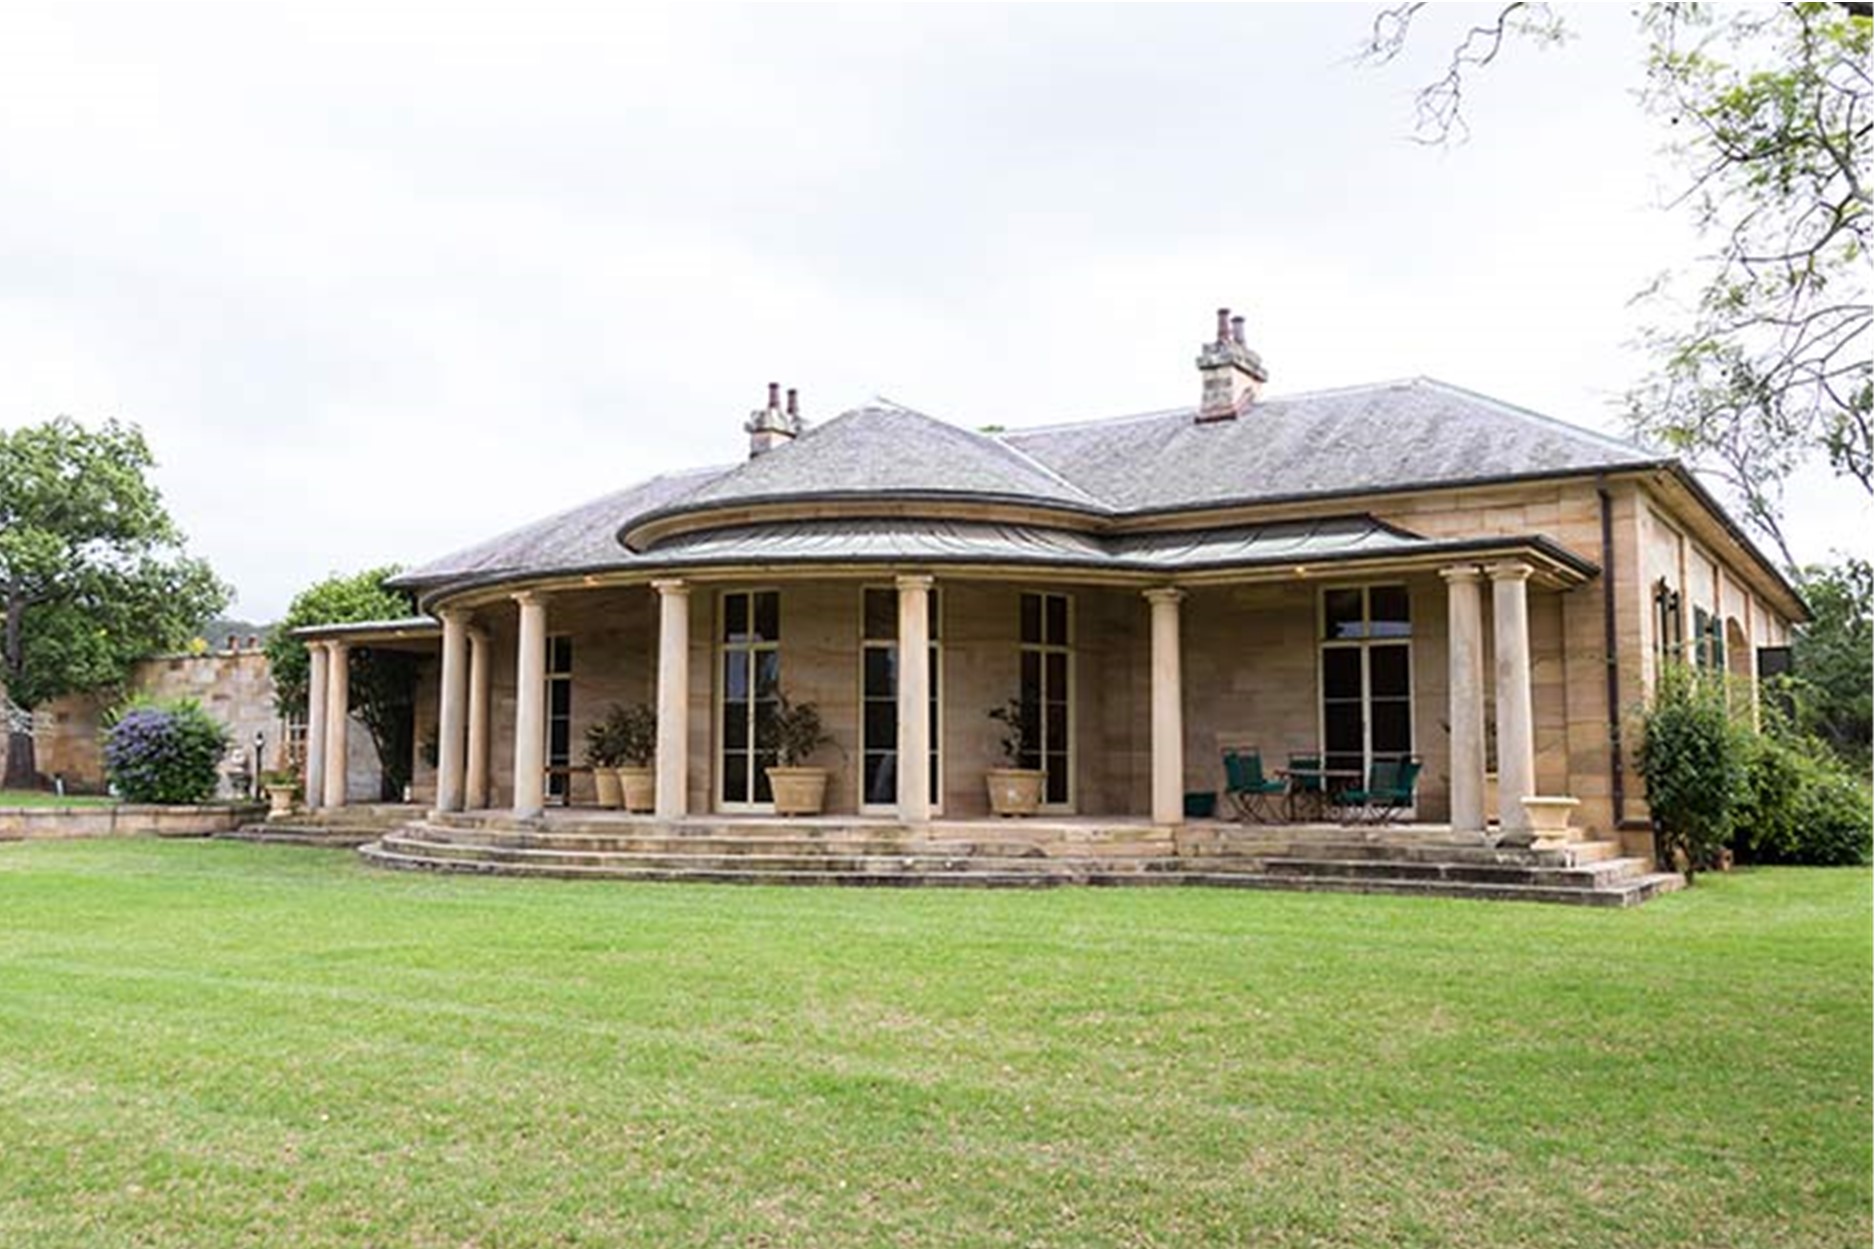 front view of the homestead on Fernhill estate